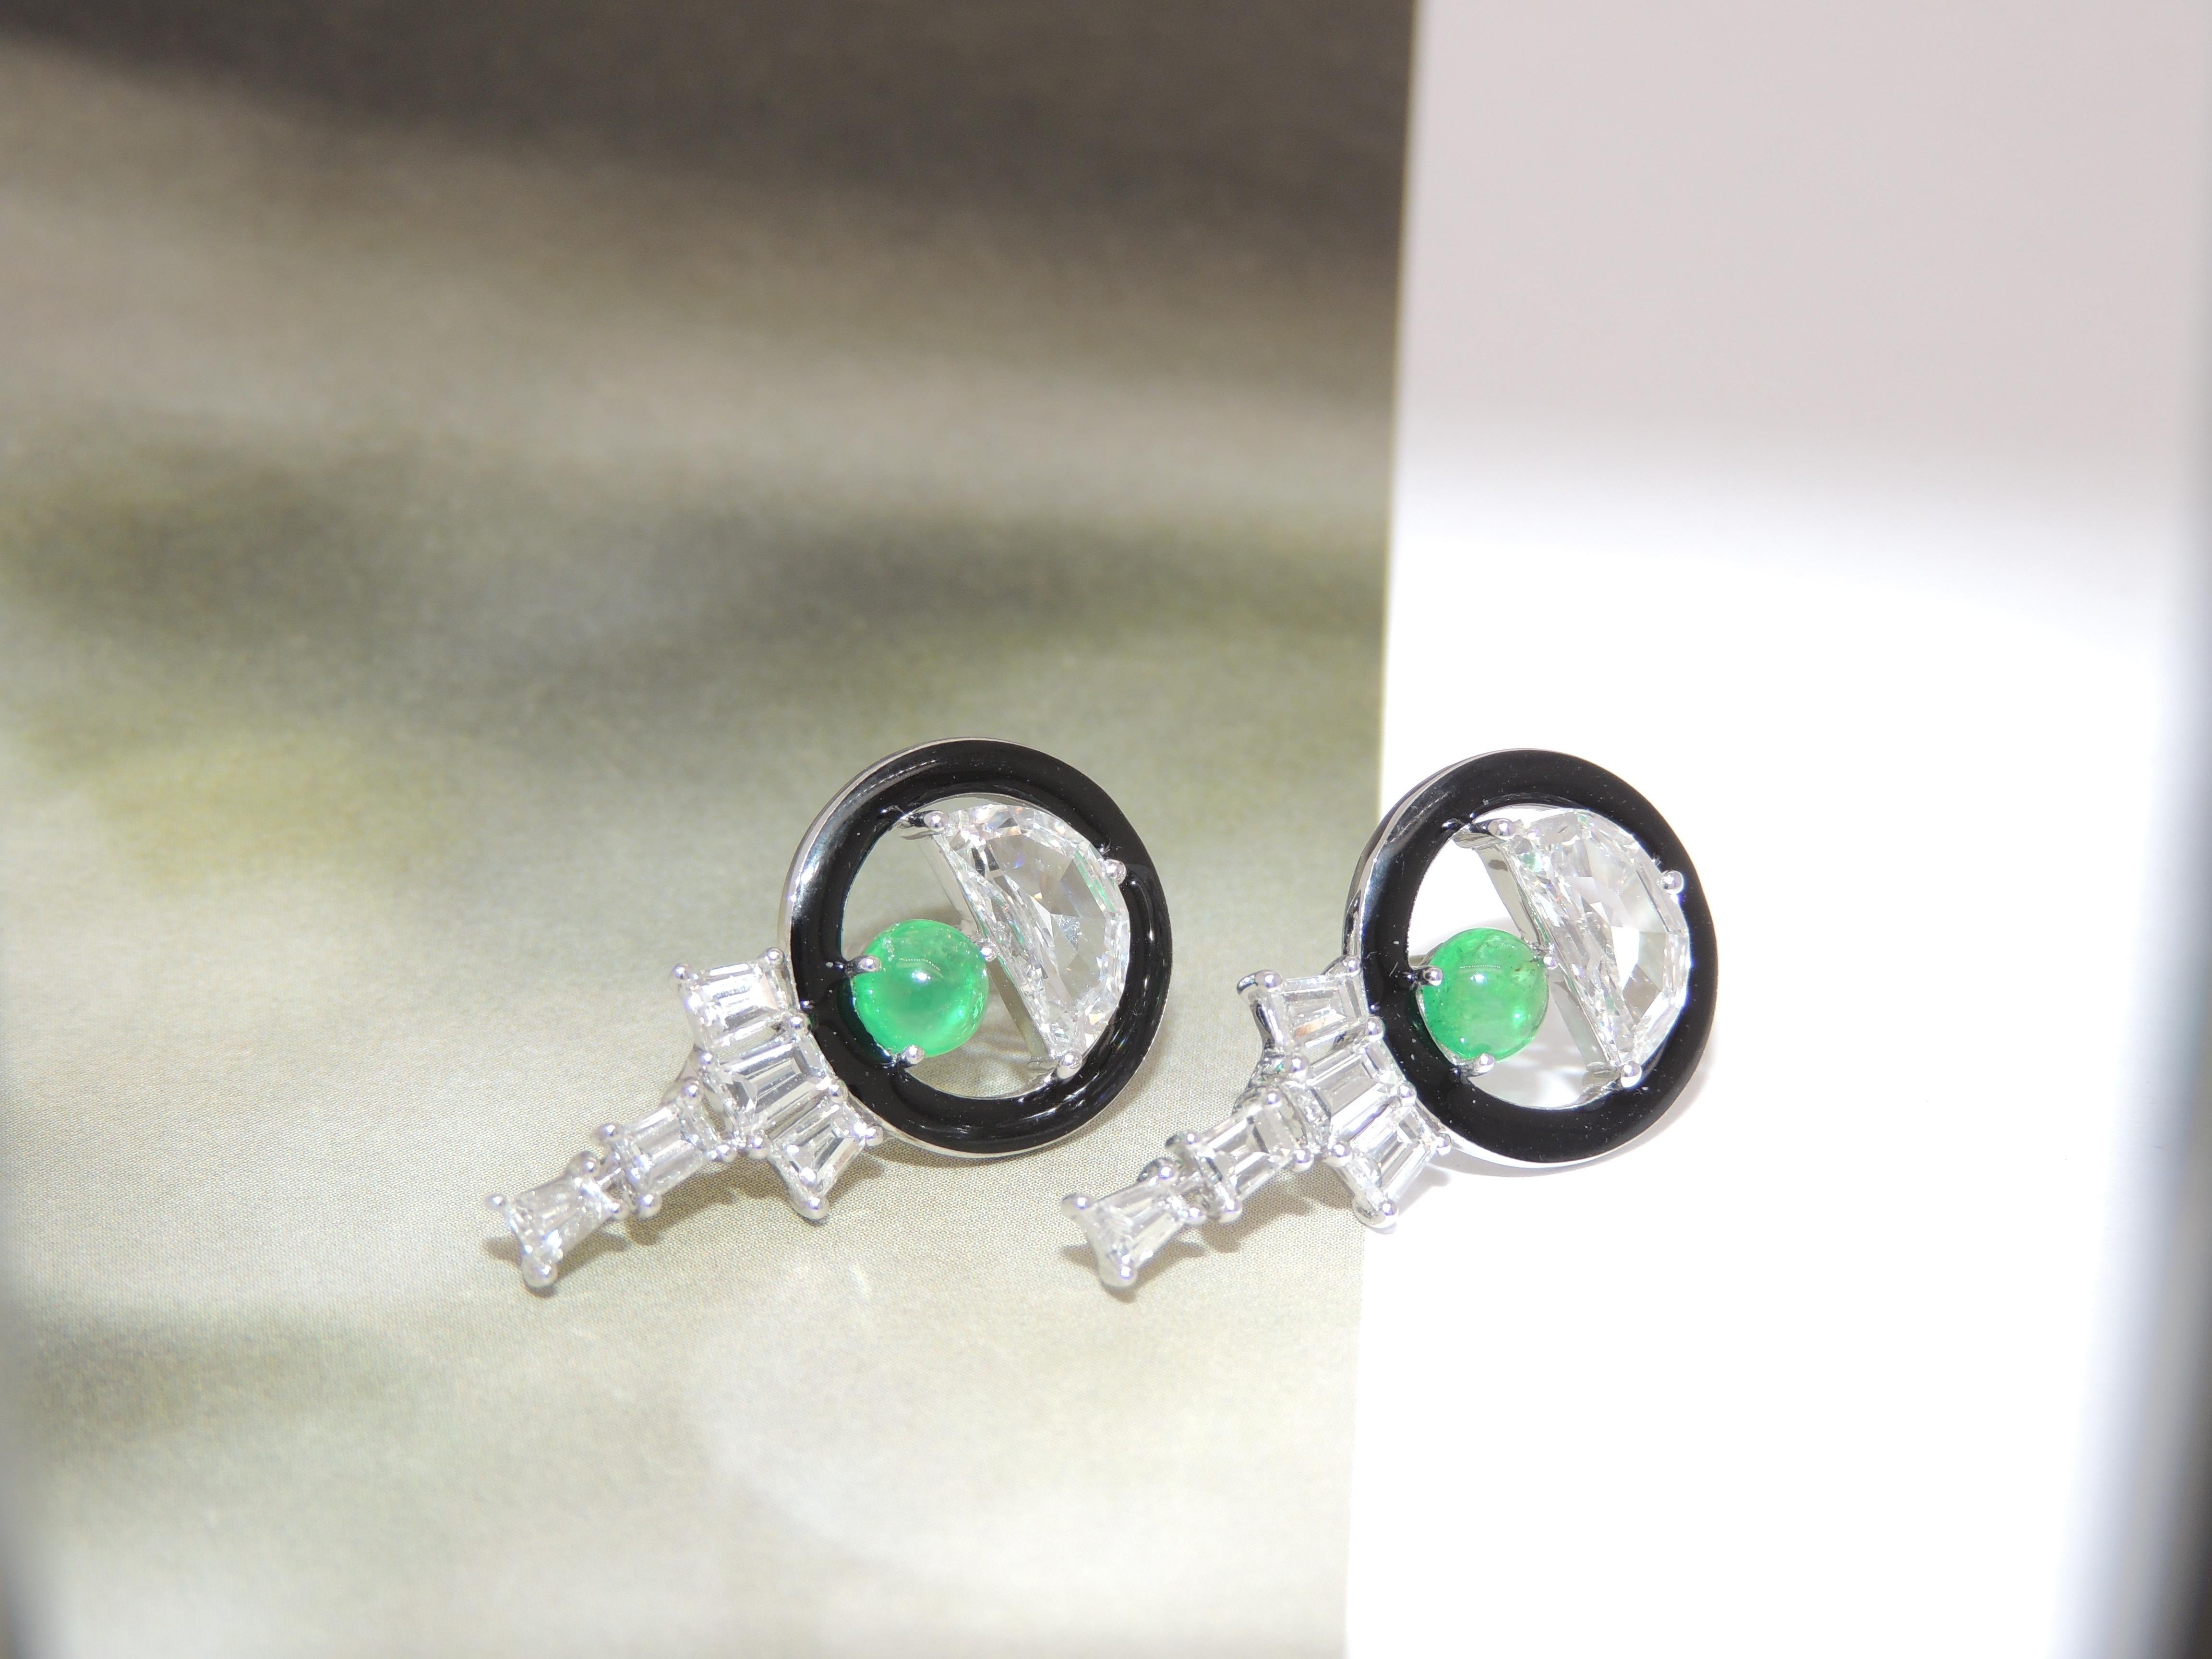 Magnificent half-moon diamonds sit pretty at the top of these earrings, with black enamel, diamond baguettes and emerald cabochons completing the piece.

Inspired by themes such as geometric design and vibrant colours from the Art Deco Period of the